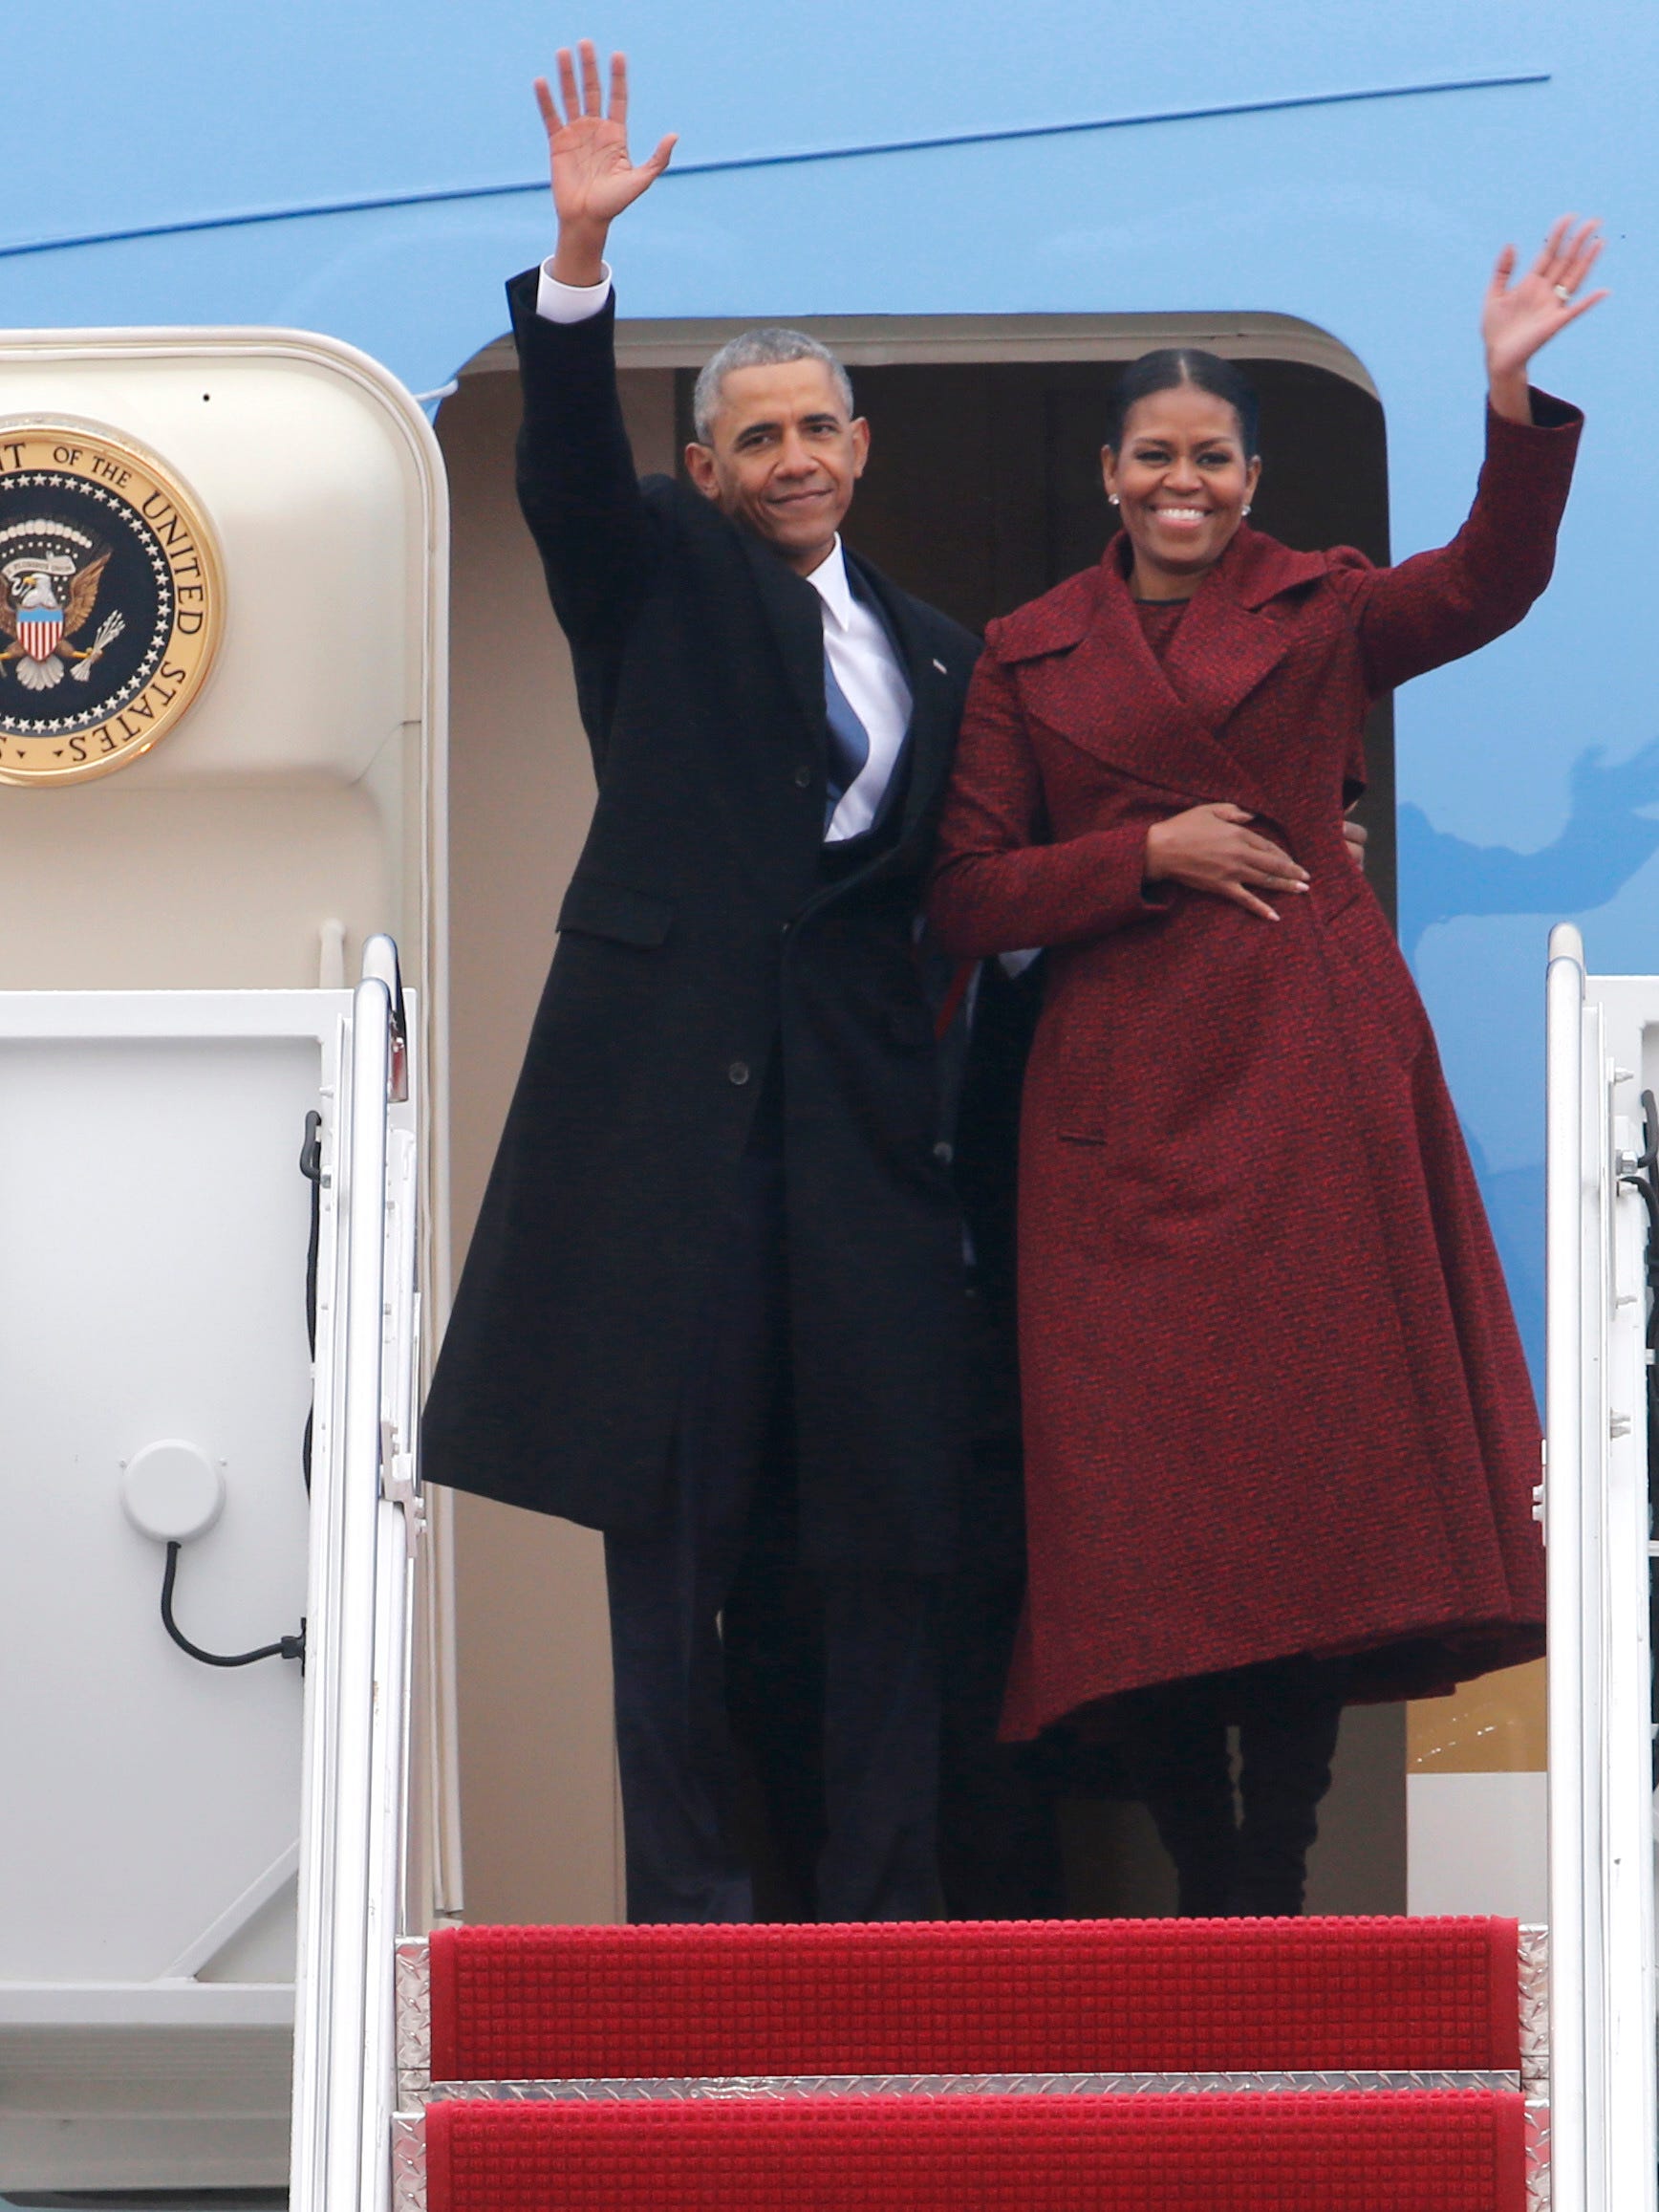 Former President Barack Obama and his wife Michelle wave as they board an Air force jet to depart Andrews Air Force base in Maryland and head to Palm Springs on Friday, Jan. 20, 2017.